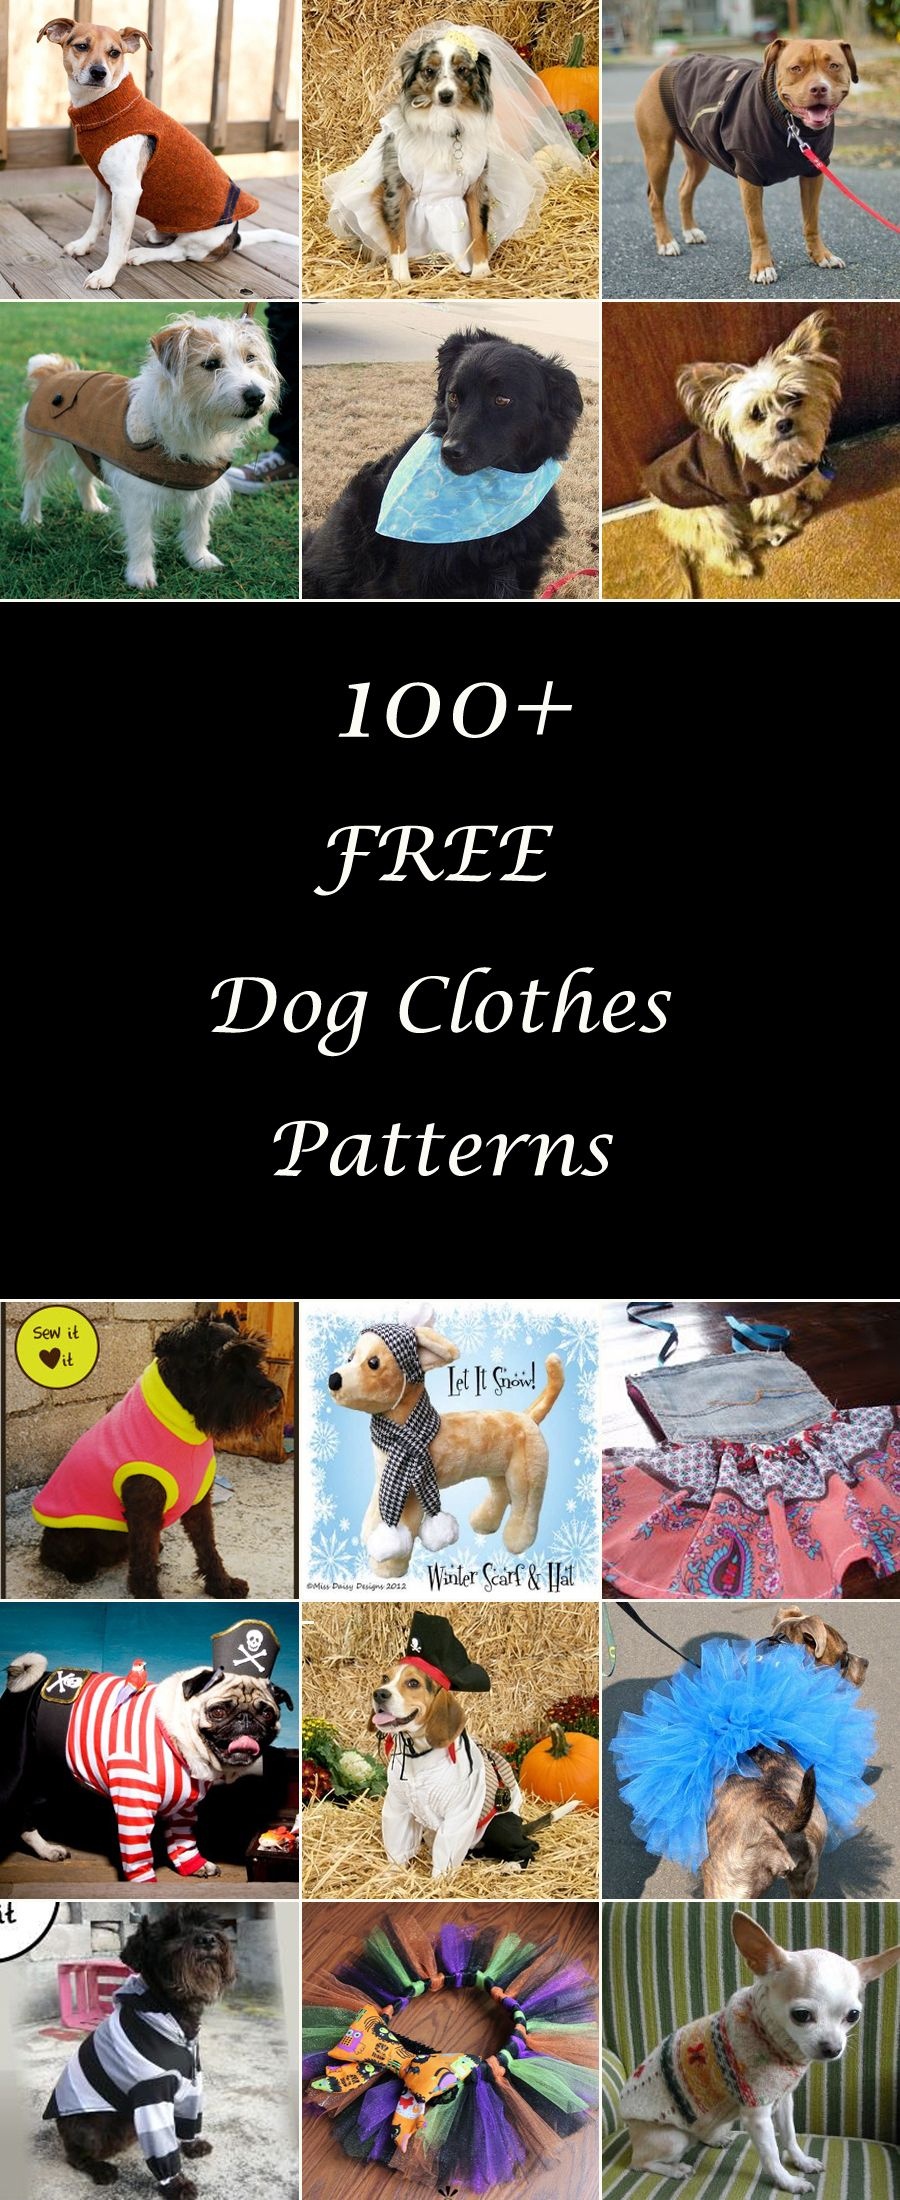 100+ Free Dog Clothes Patterns | Adorable Animals | Dog Clothes - Free Printable Sewing Patterns For Dog Clothes